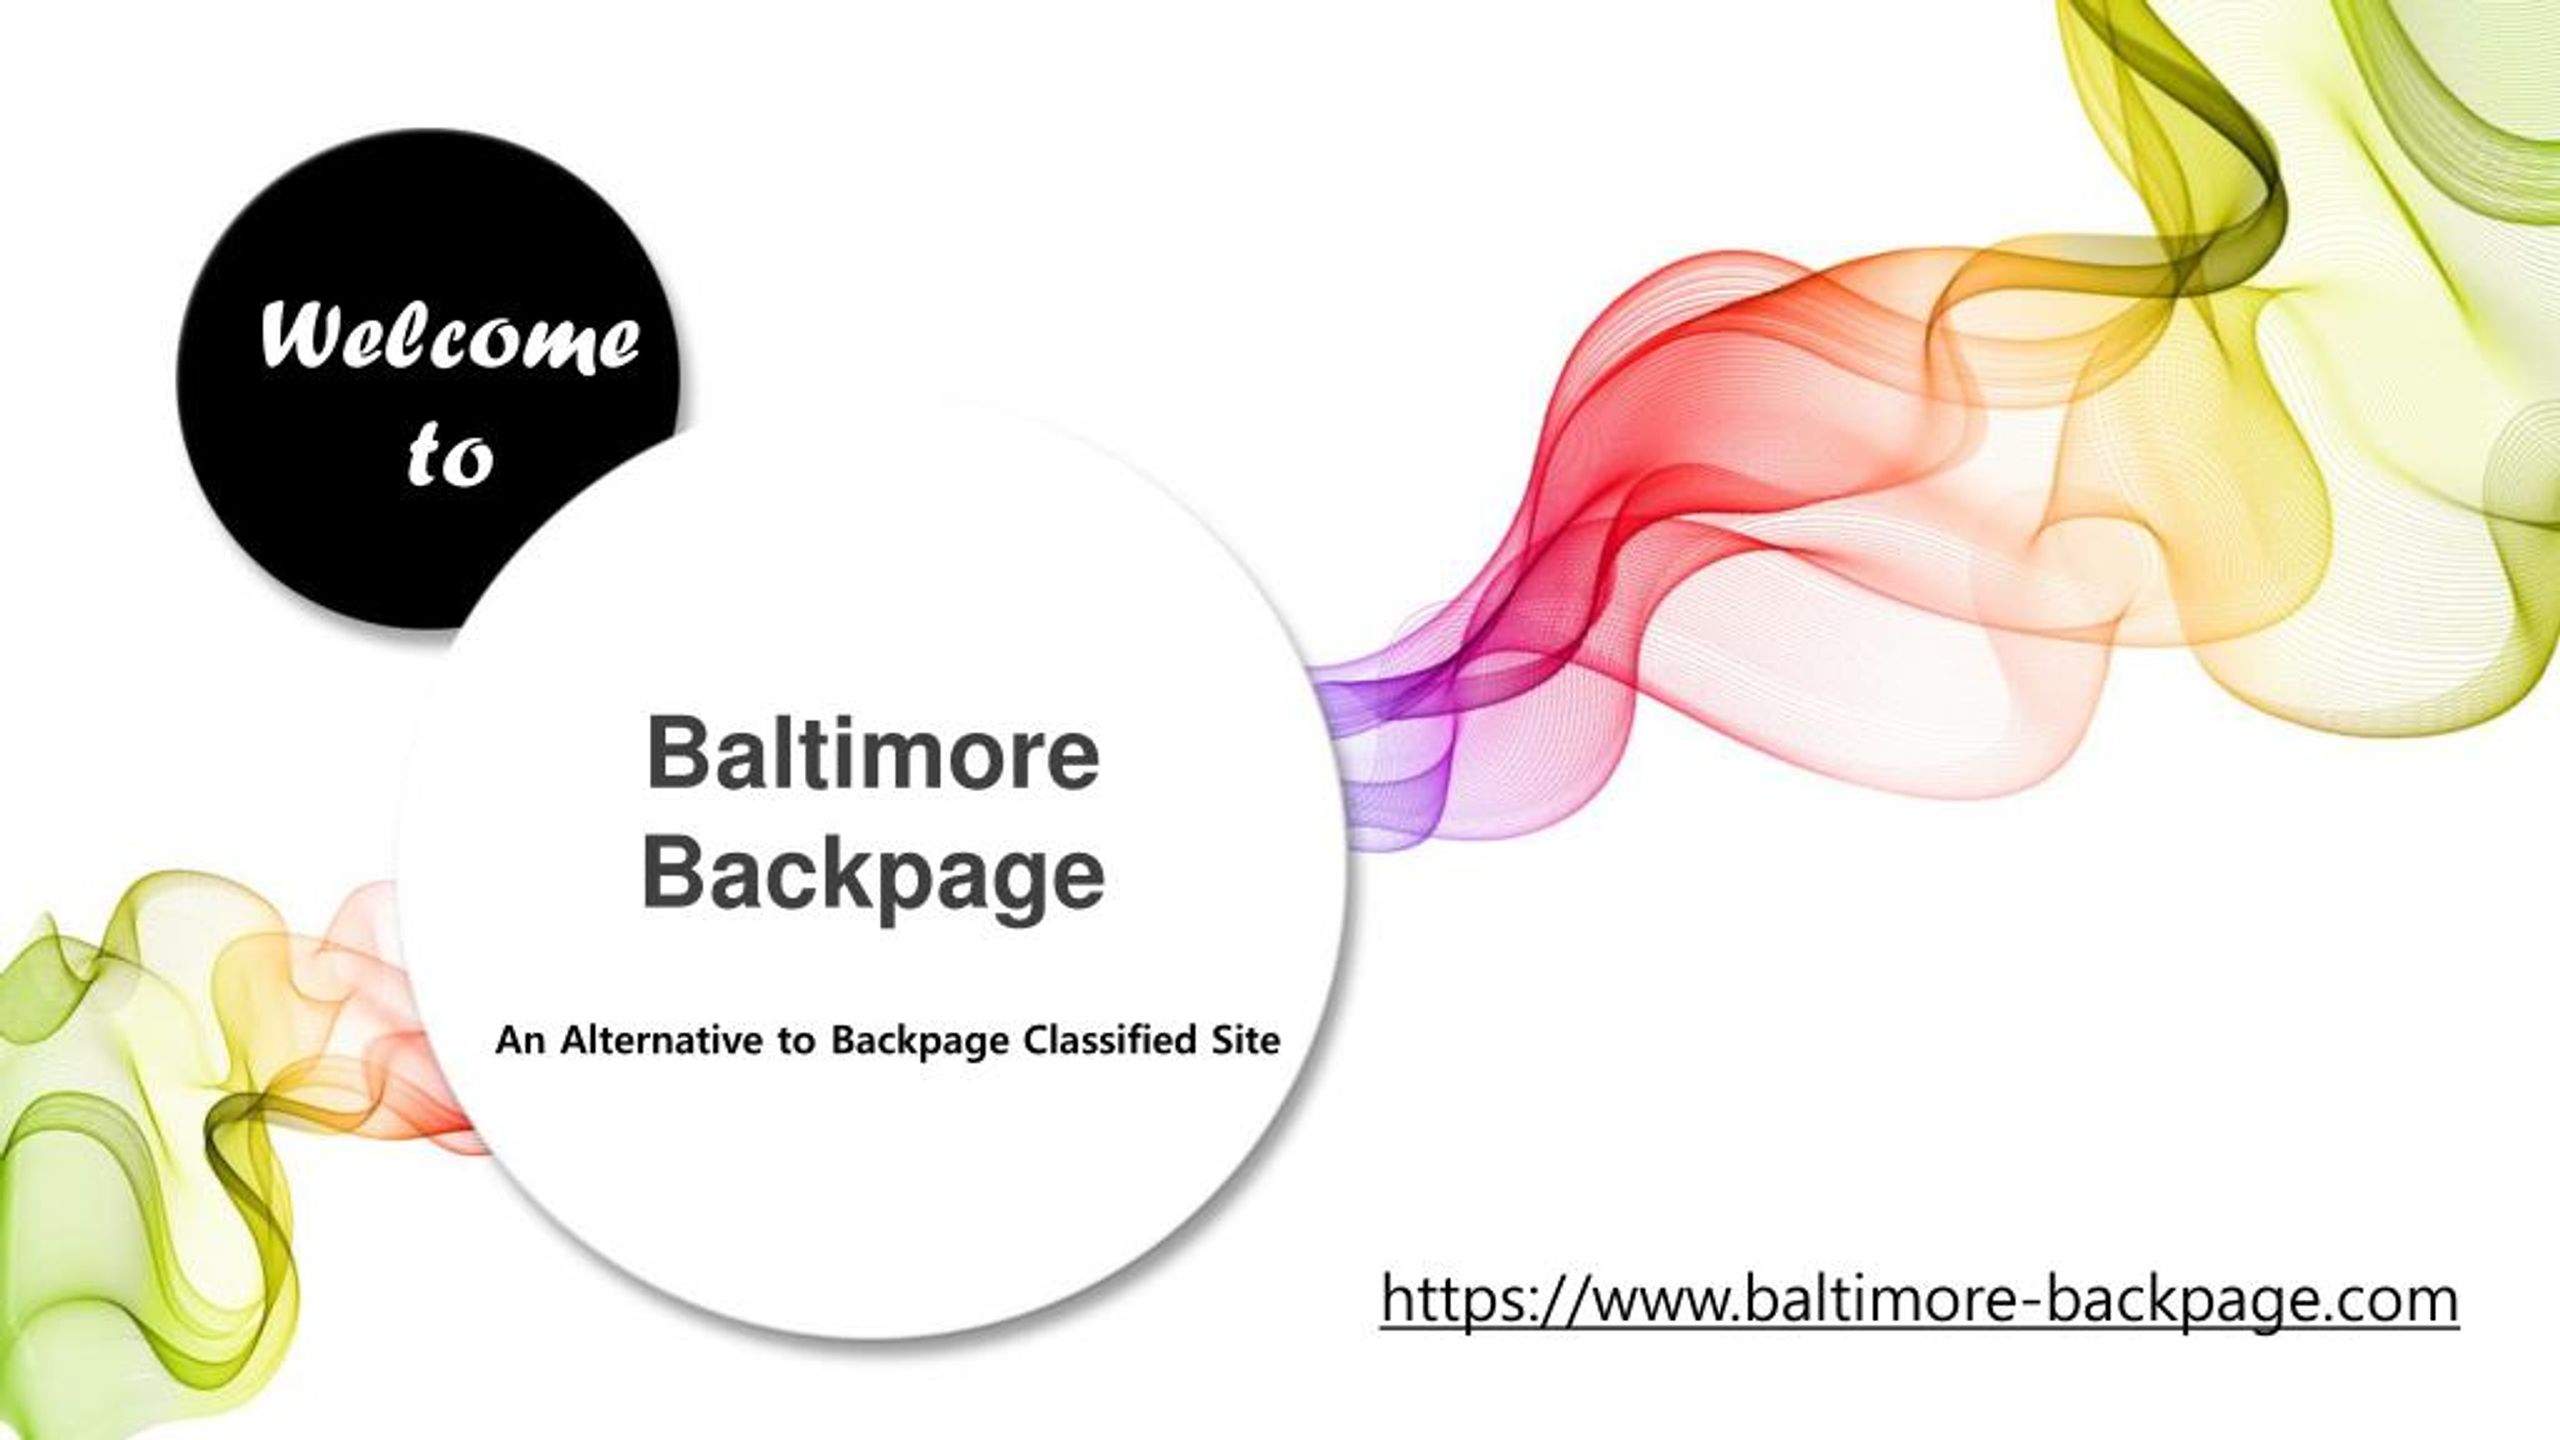 cathy van graan recommends Www Baltimore Backpage Com